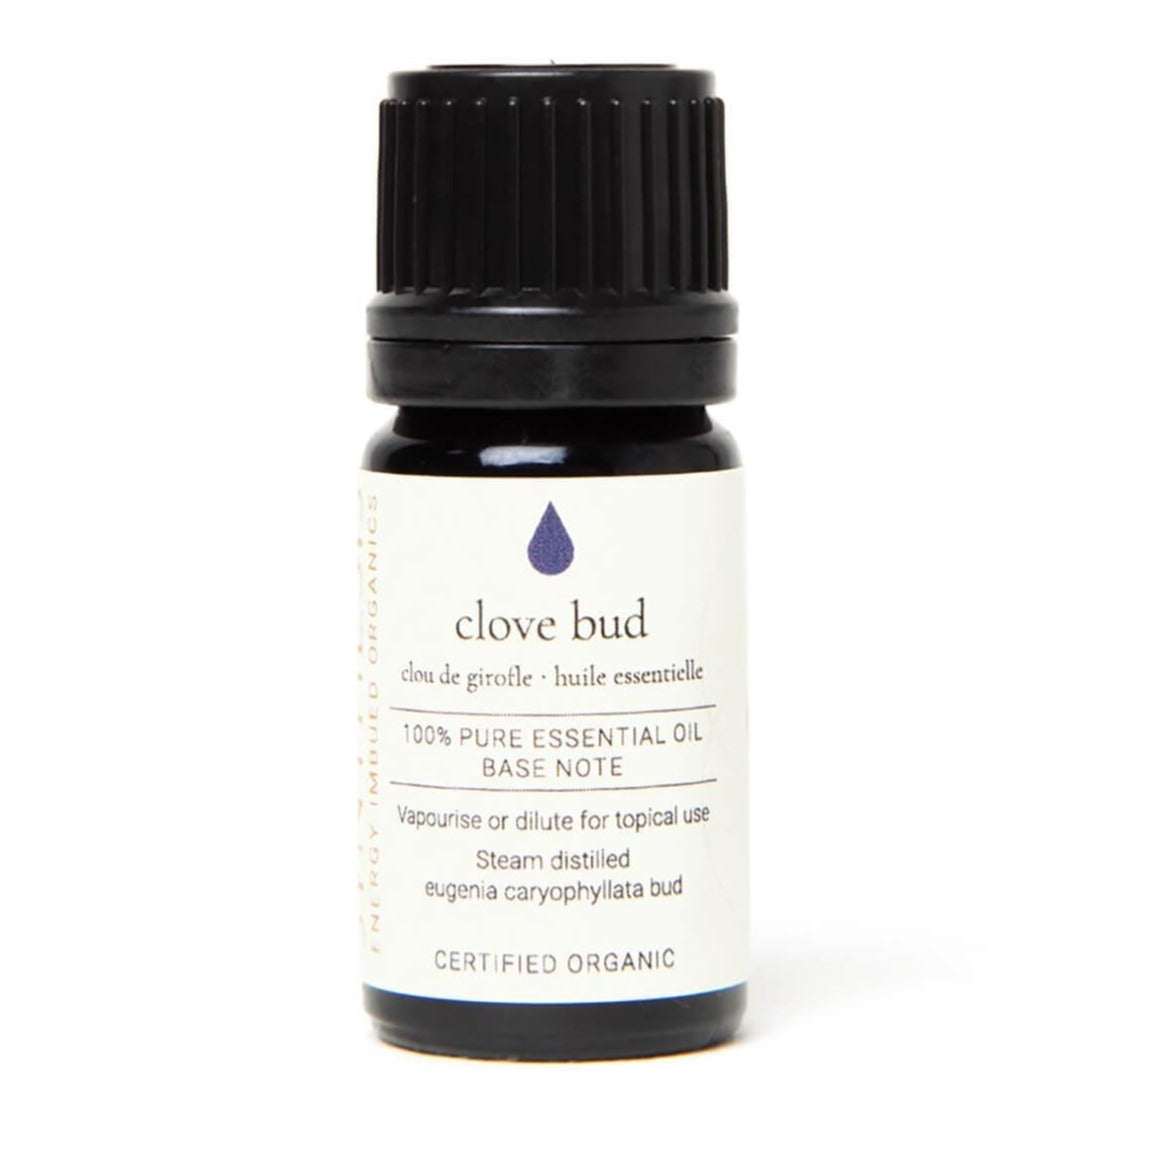 Clove Bud Certified Organic Essential Oil aroma Synthesis Organics